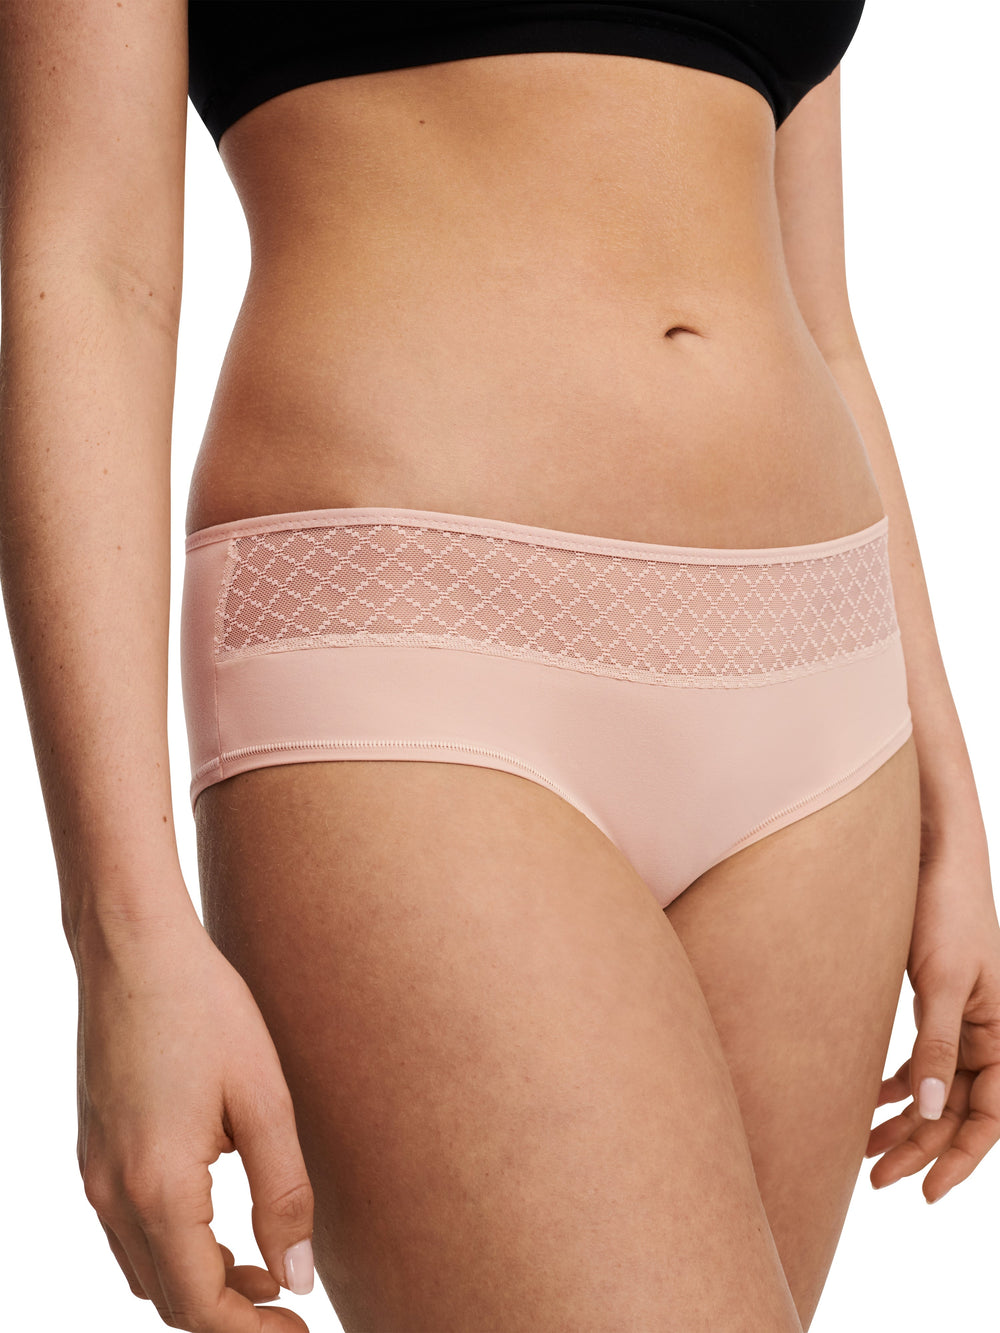 Chantelle EasyFeel - Shorty Cubre Norah Chic Shorty Rosa Oscuro Chantelle EasyFeel